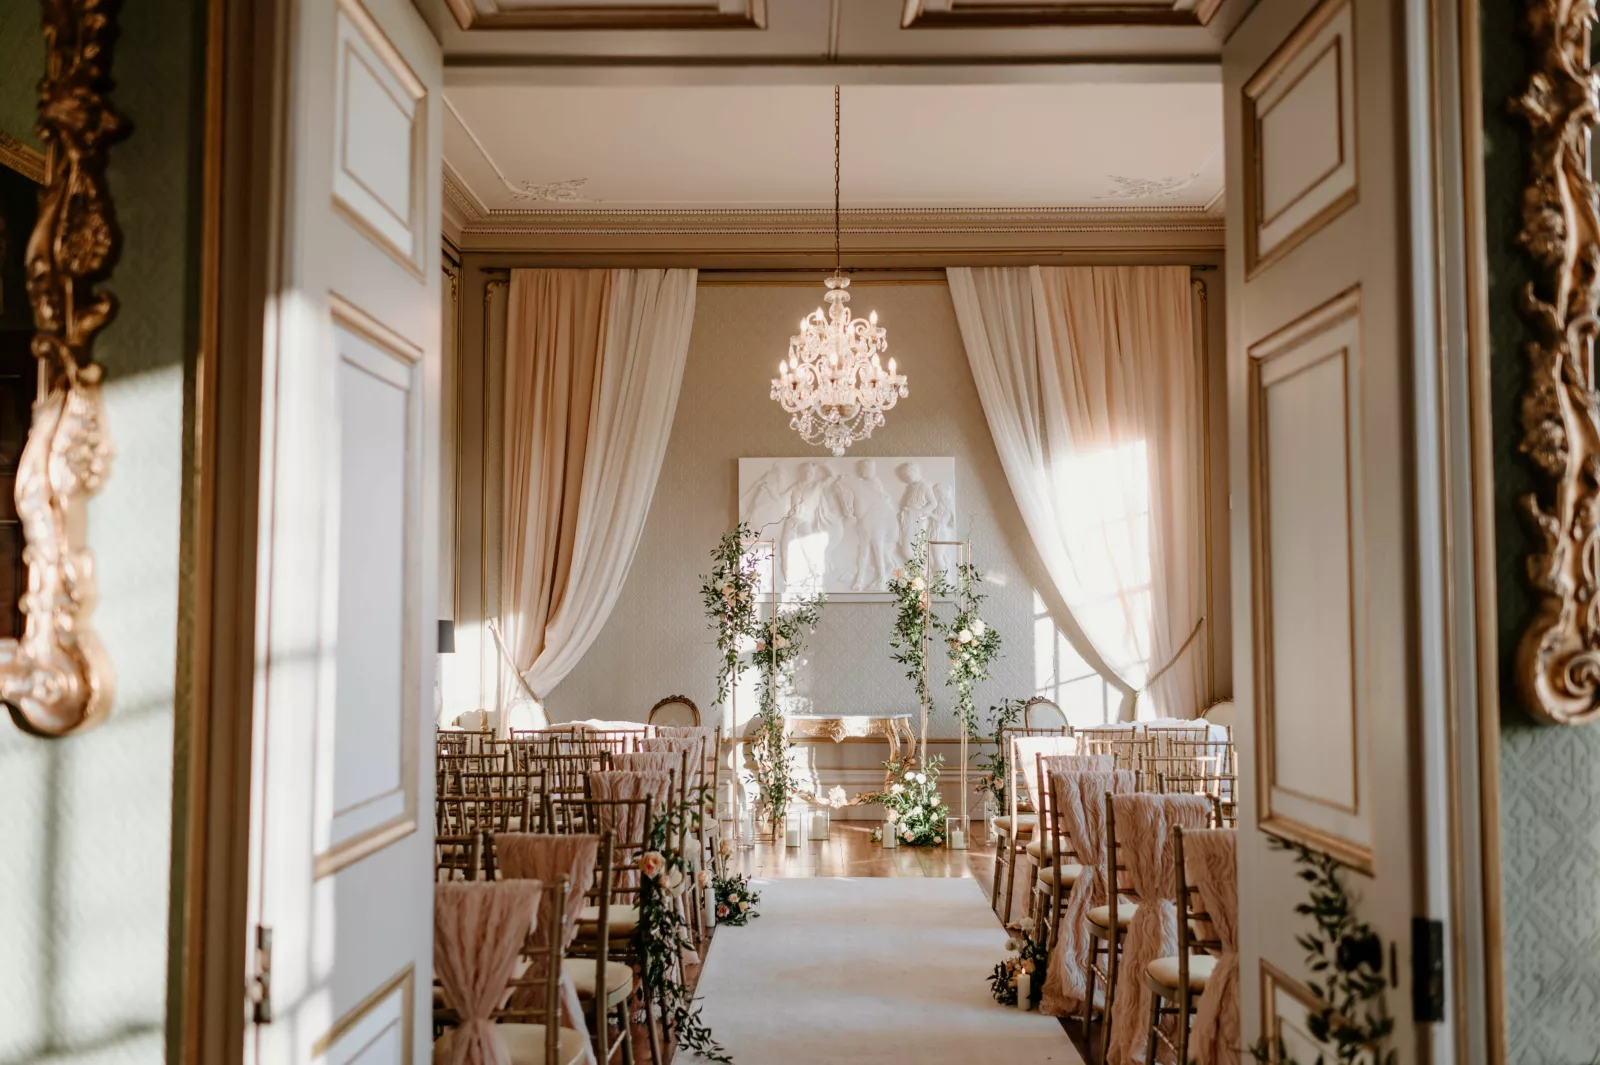 Dine Venues | Rise Hall | Winter wedding in Yorkshire | Stately home wedding venue | Peach wedding | Lucy Dennis Photography